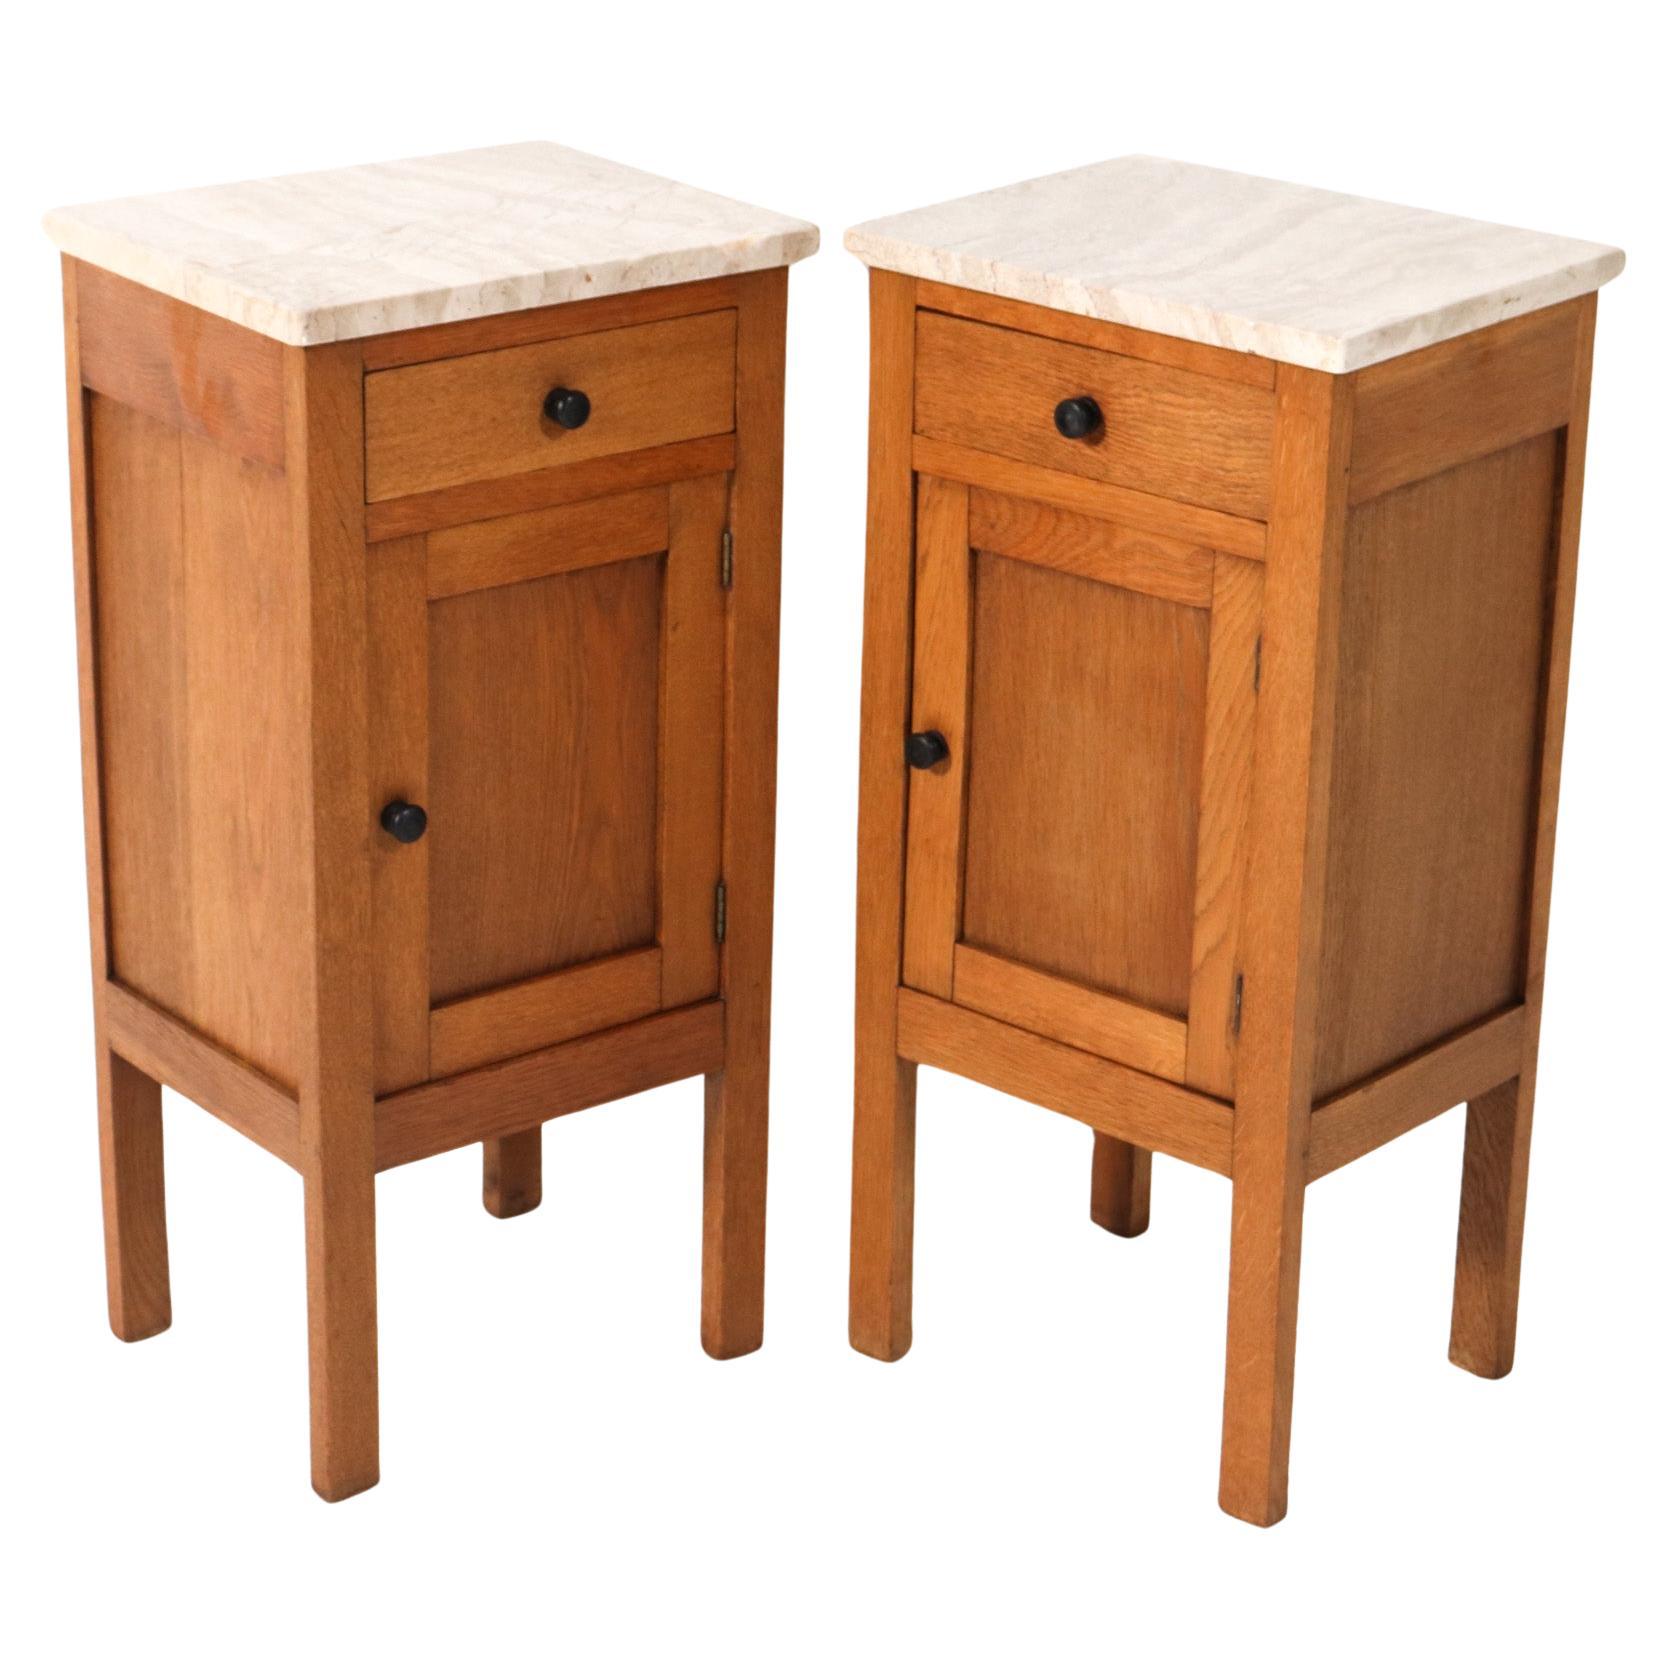 Two Oak Arts & Crafts Art Nouveau Nightstands or Bedside Tables, 1900s For Sale